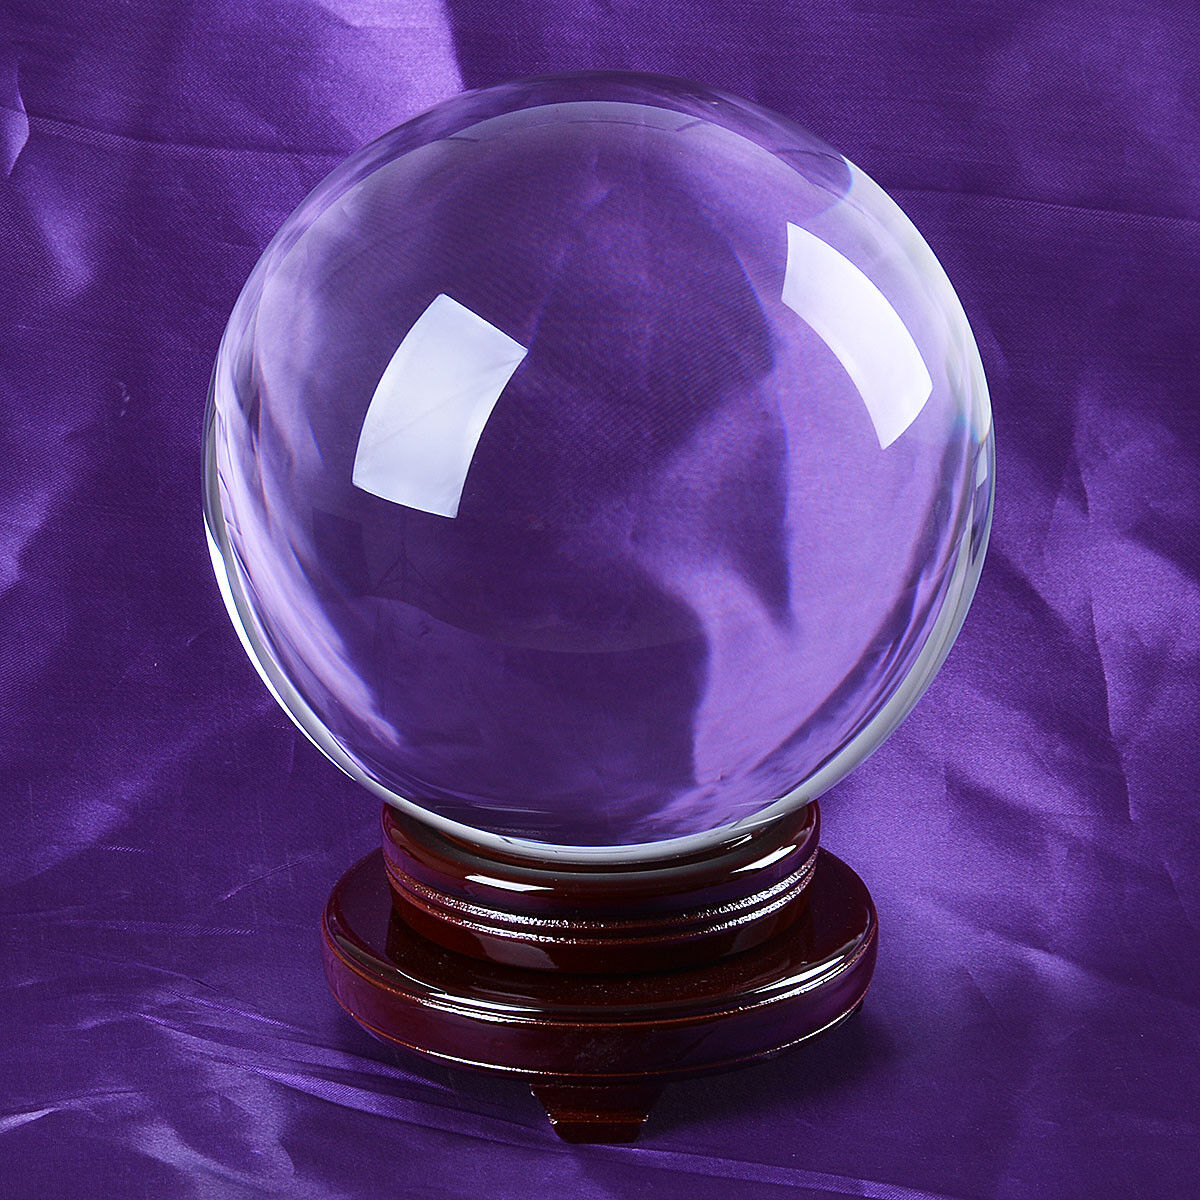 LONGWIN 200MM Clear Crystal Ball Divination Glass Sphere Photo Prop Free Stand